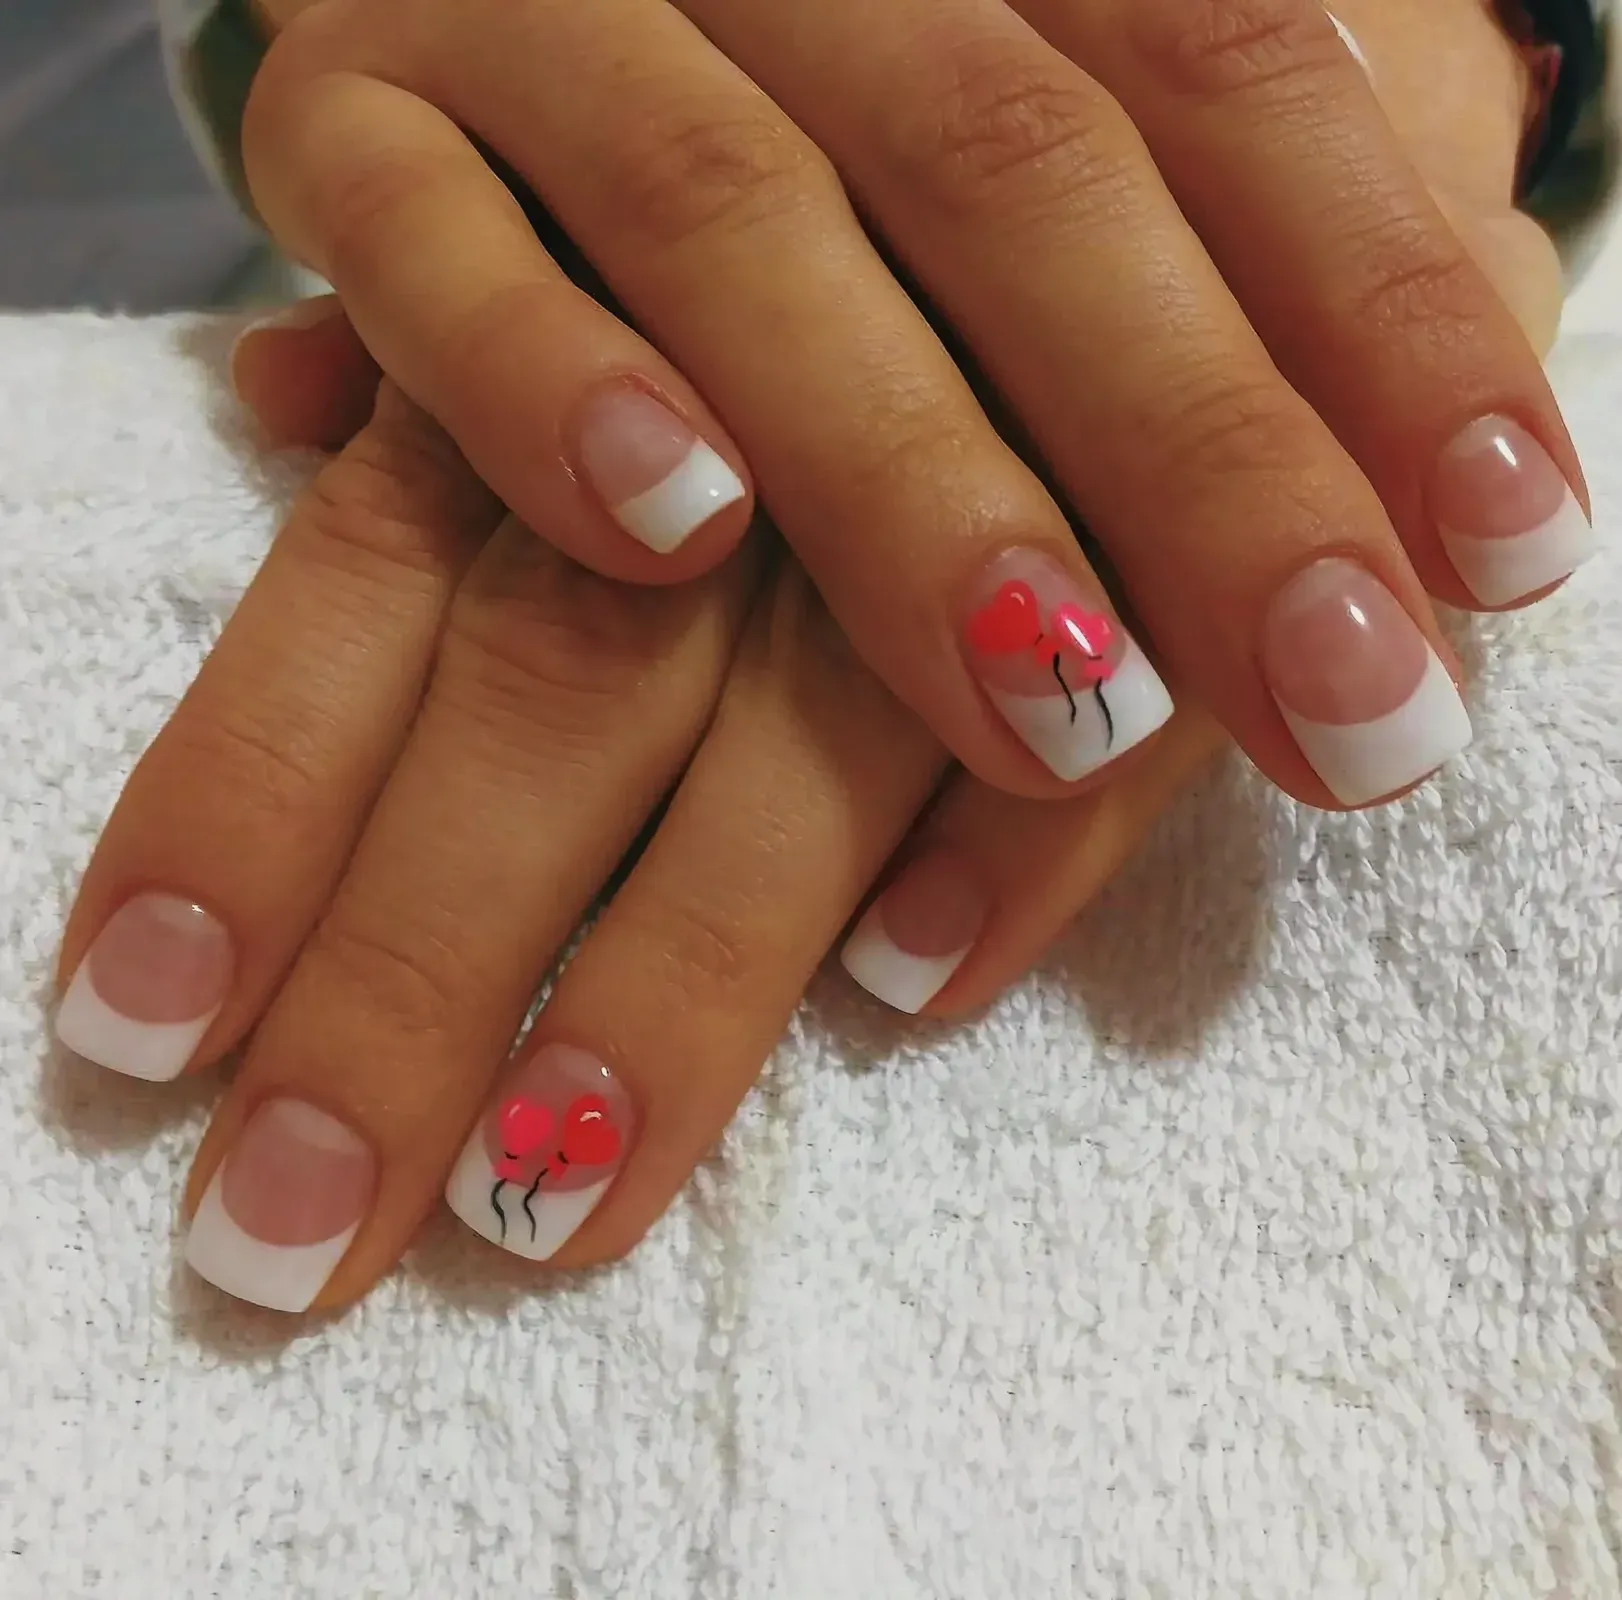 Close-up view of beautifully painted nails with red heart design